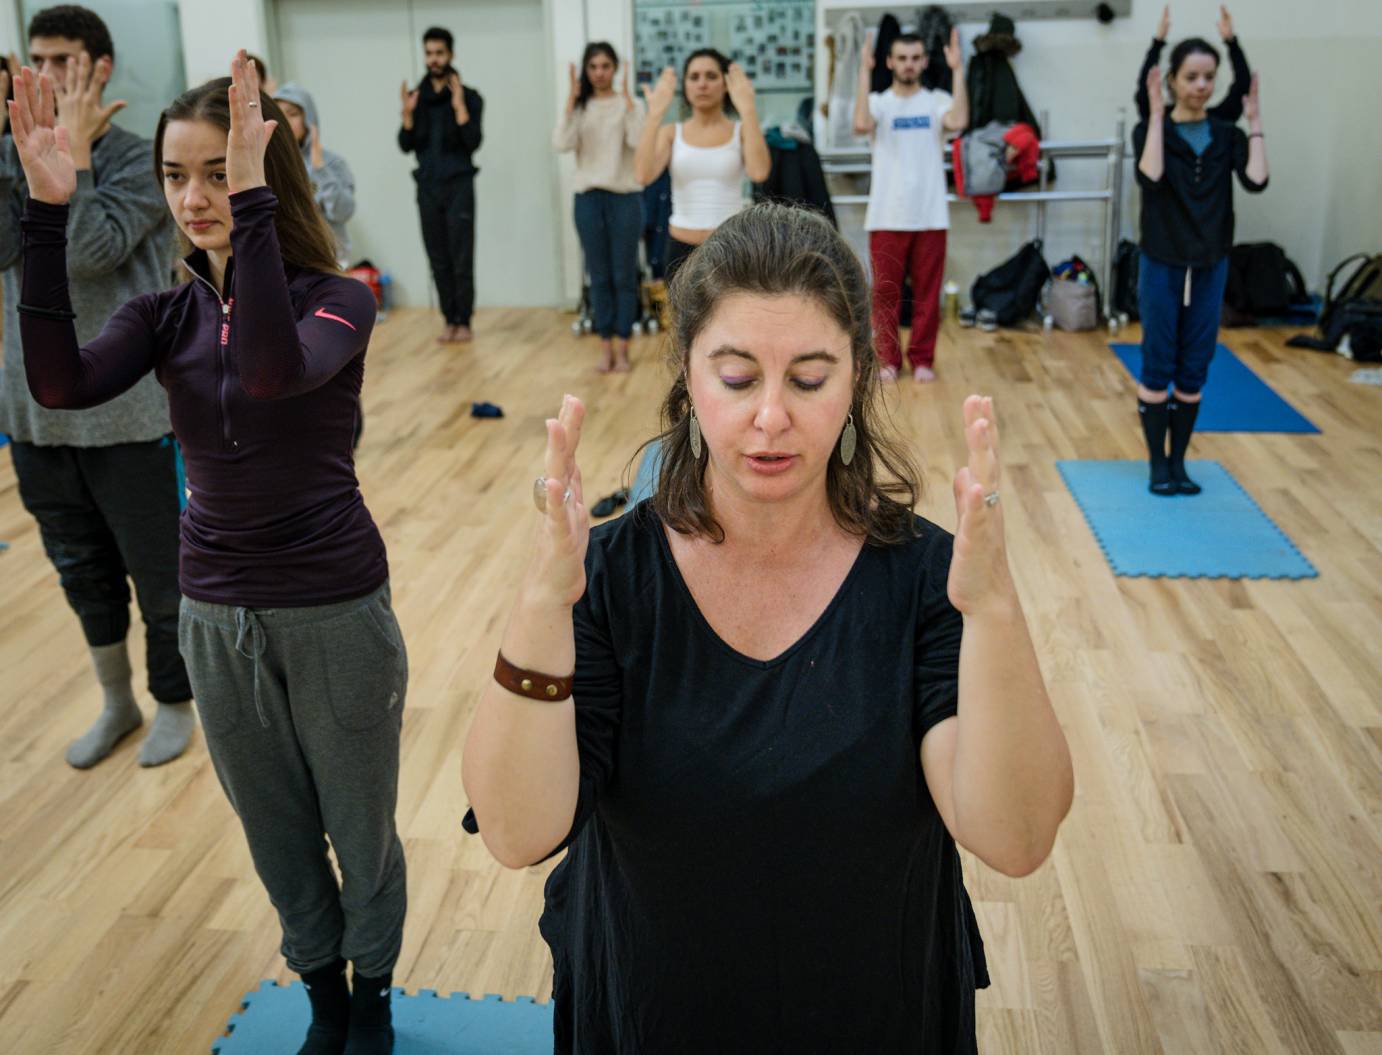 Anabella Lenzu with fair skin brown hair wearing dangling blue earrings and a black outfit leads a class of students. All are standing on blue yoga mats with eyes closed, legs together and arms bent at the elbow, hands framing the face.